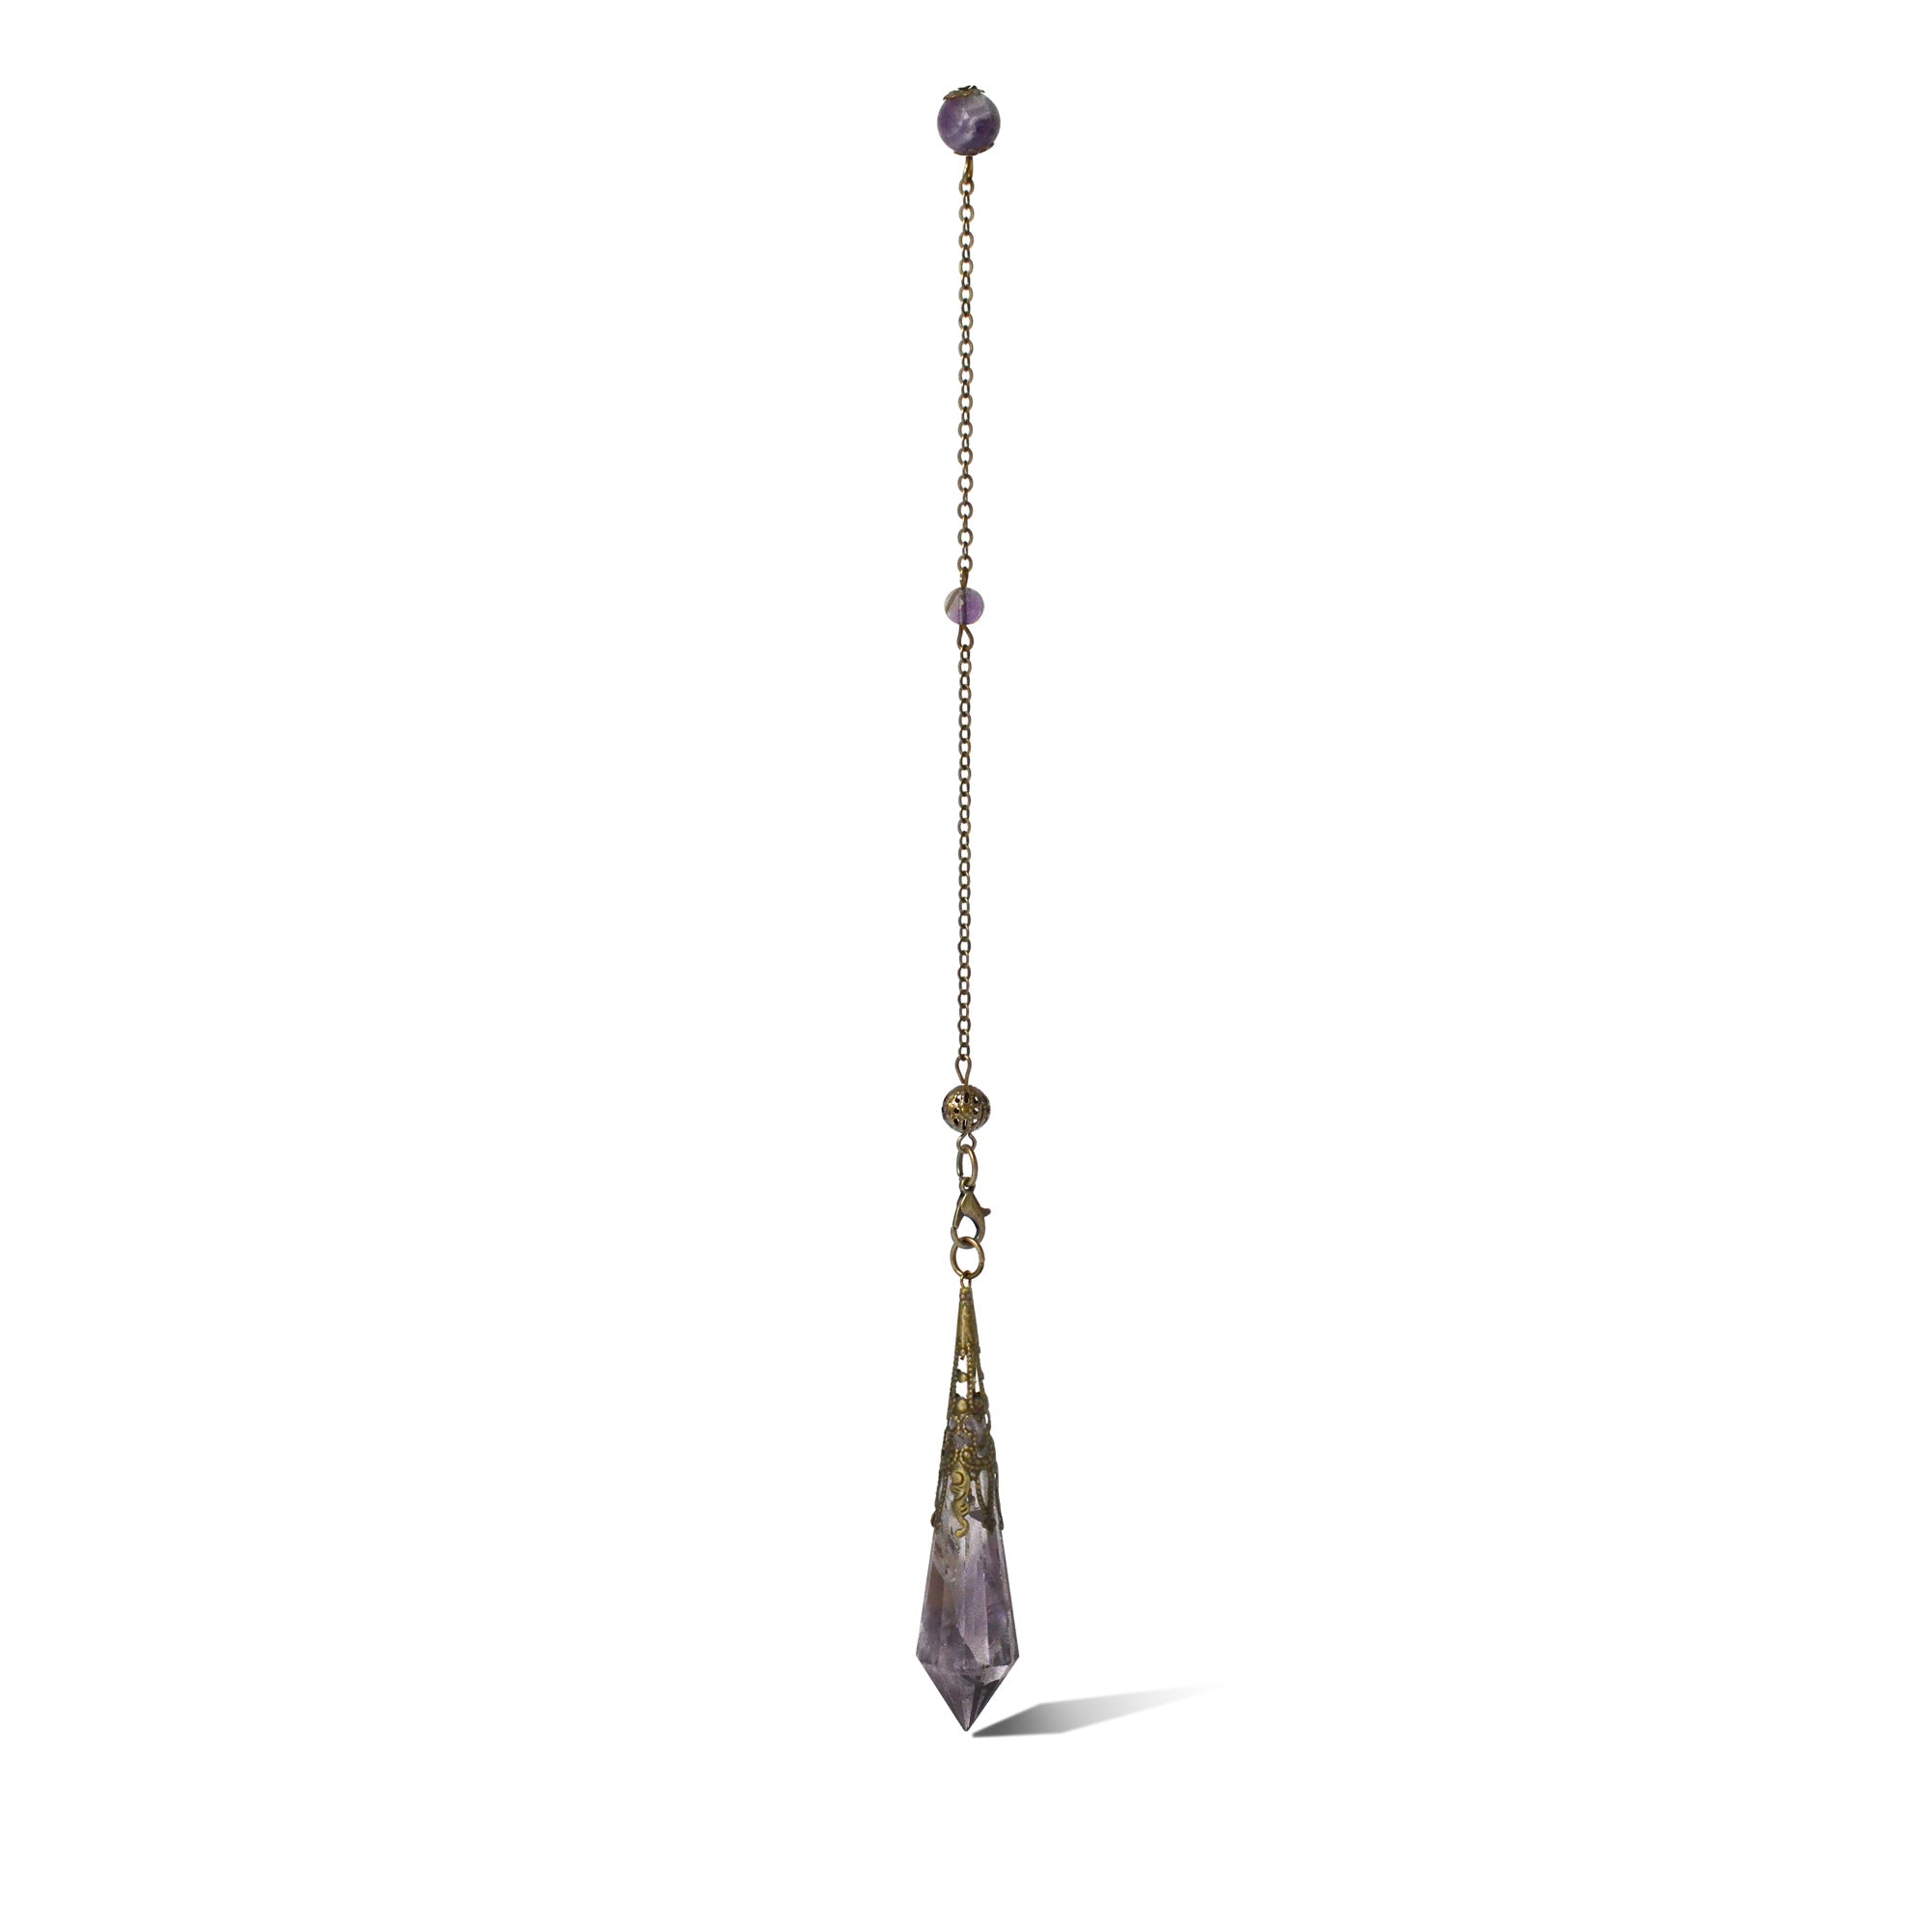 Amethyst crystal pendulum for divination and healing